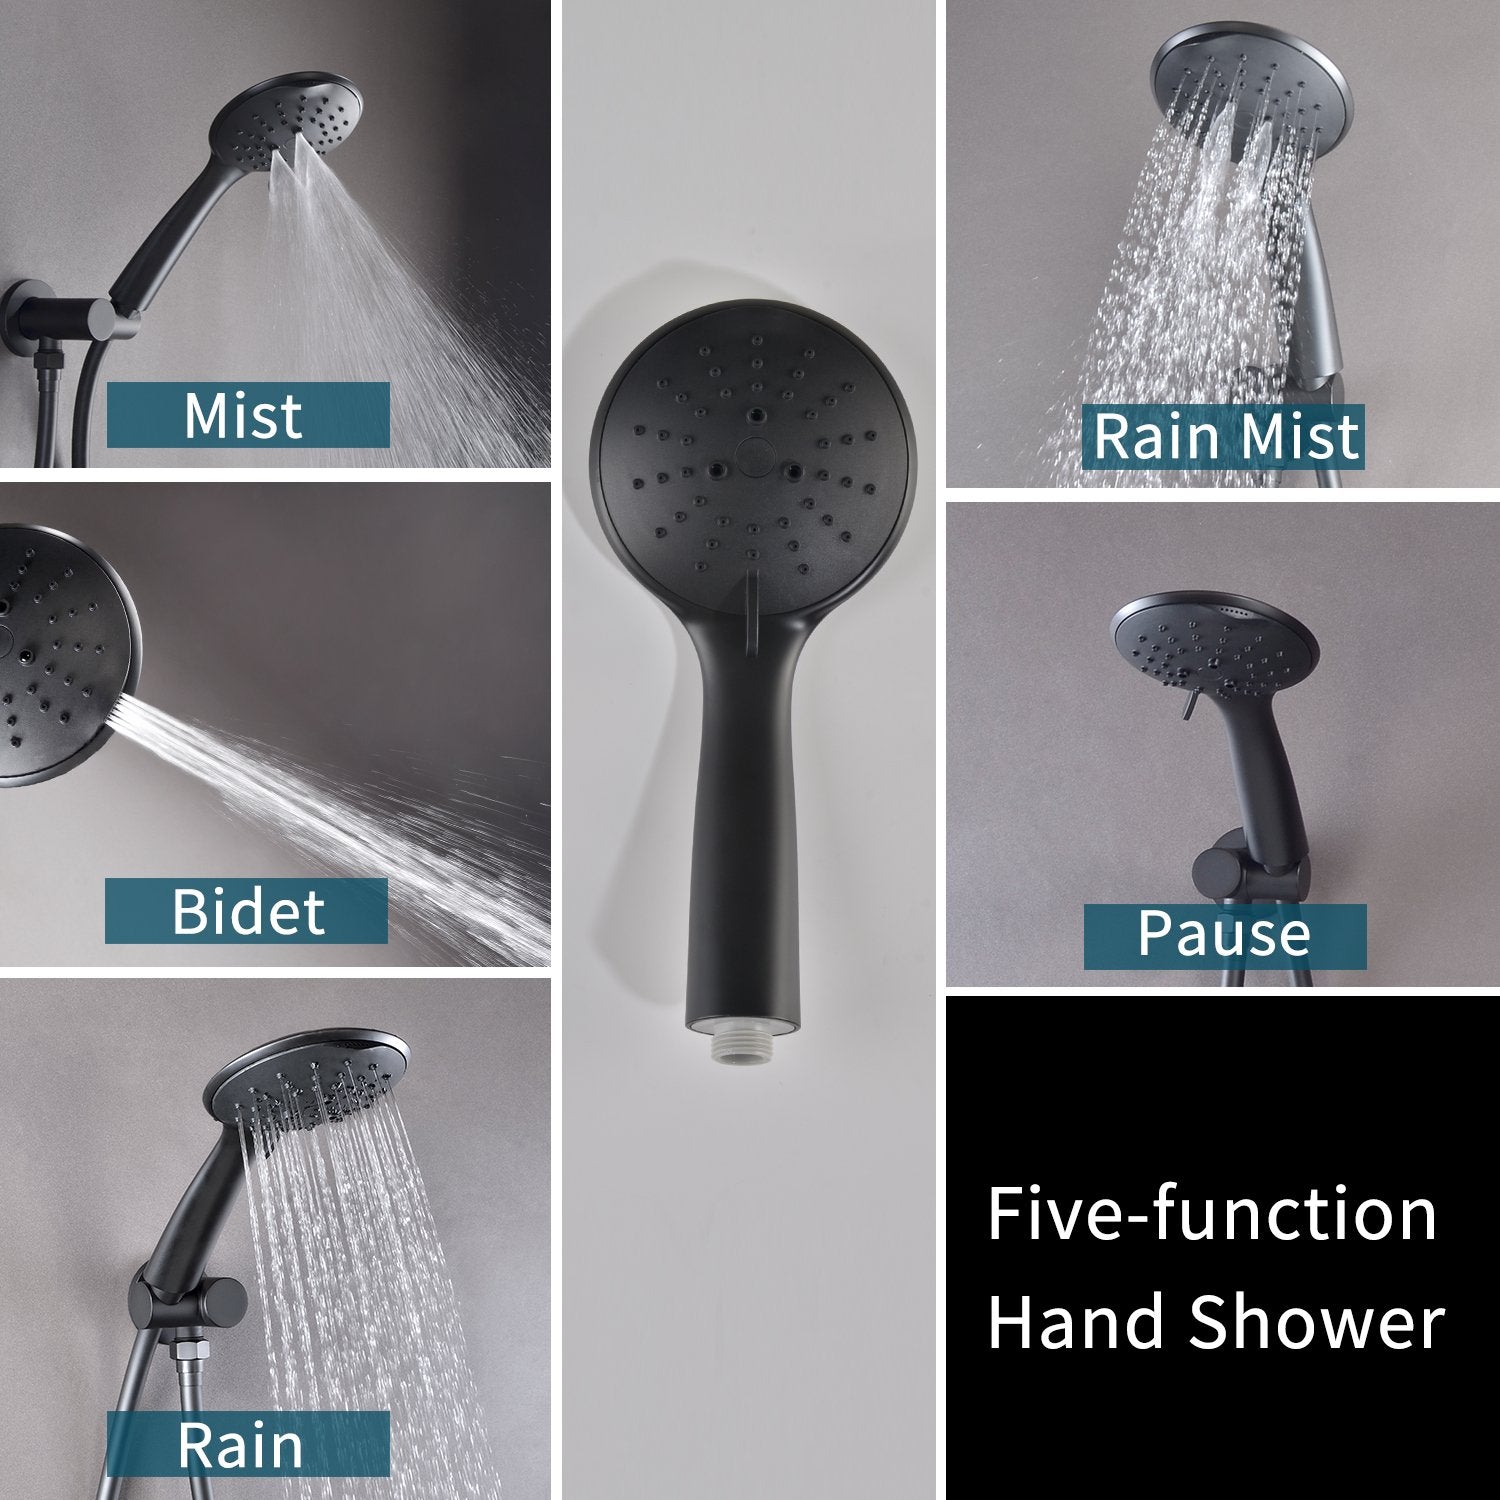 5-Spray Patterns with 2.66 GPM 9 in. Wall Mount Dual Shower Heads with Pressure Balance Round-In Valve in Matte Black - Alipuinc